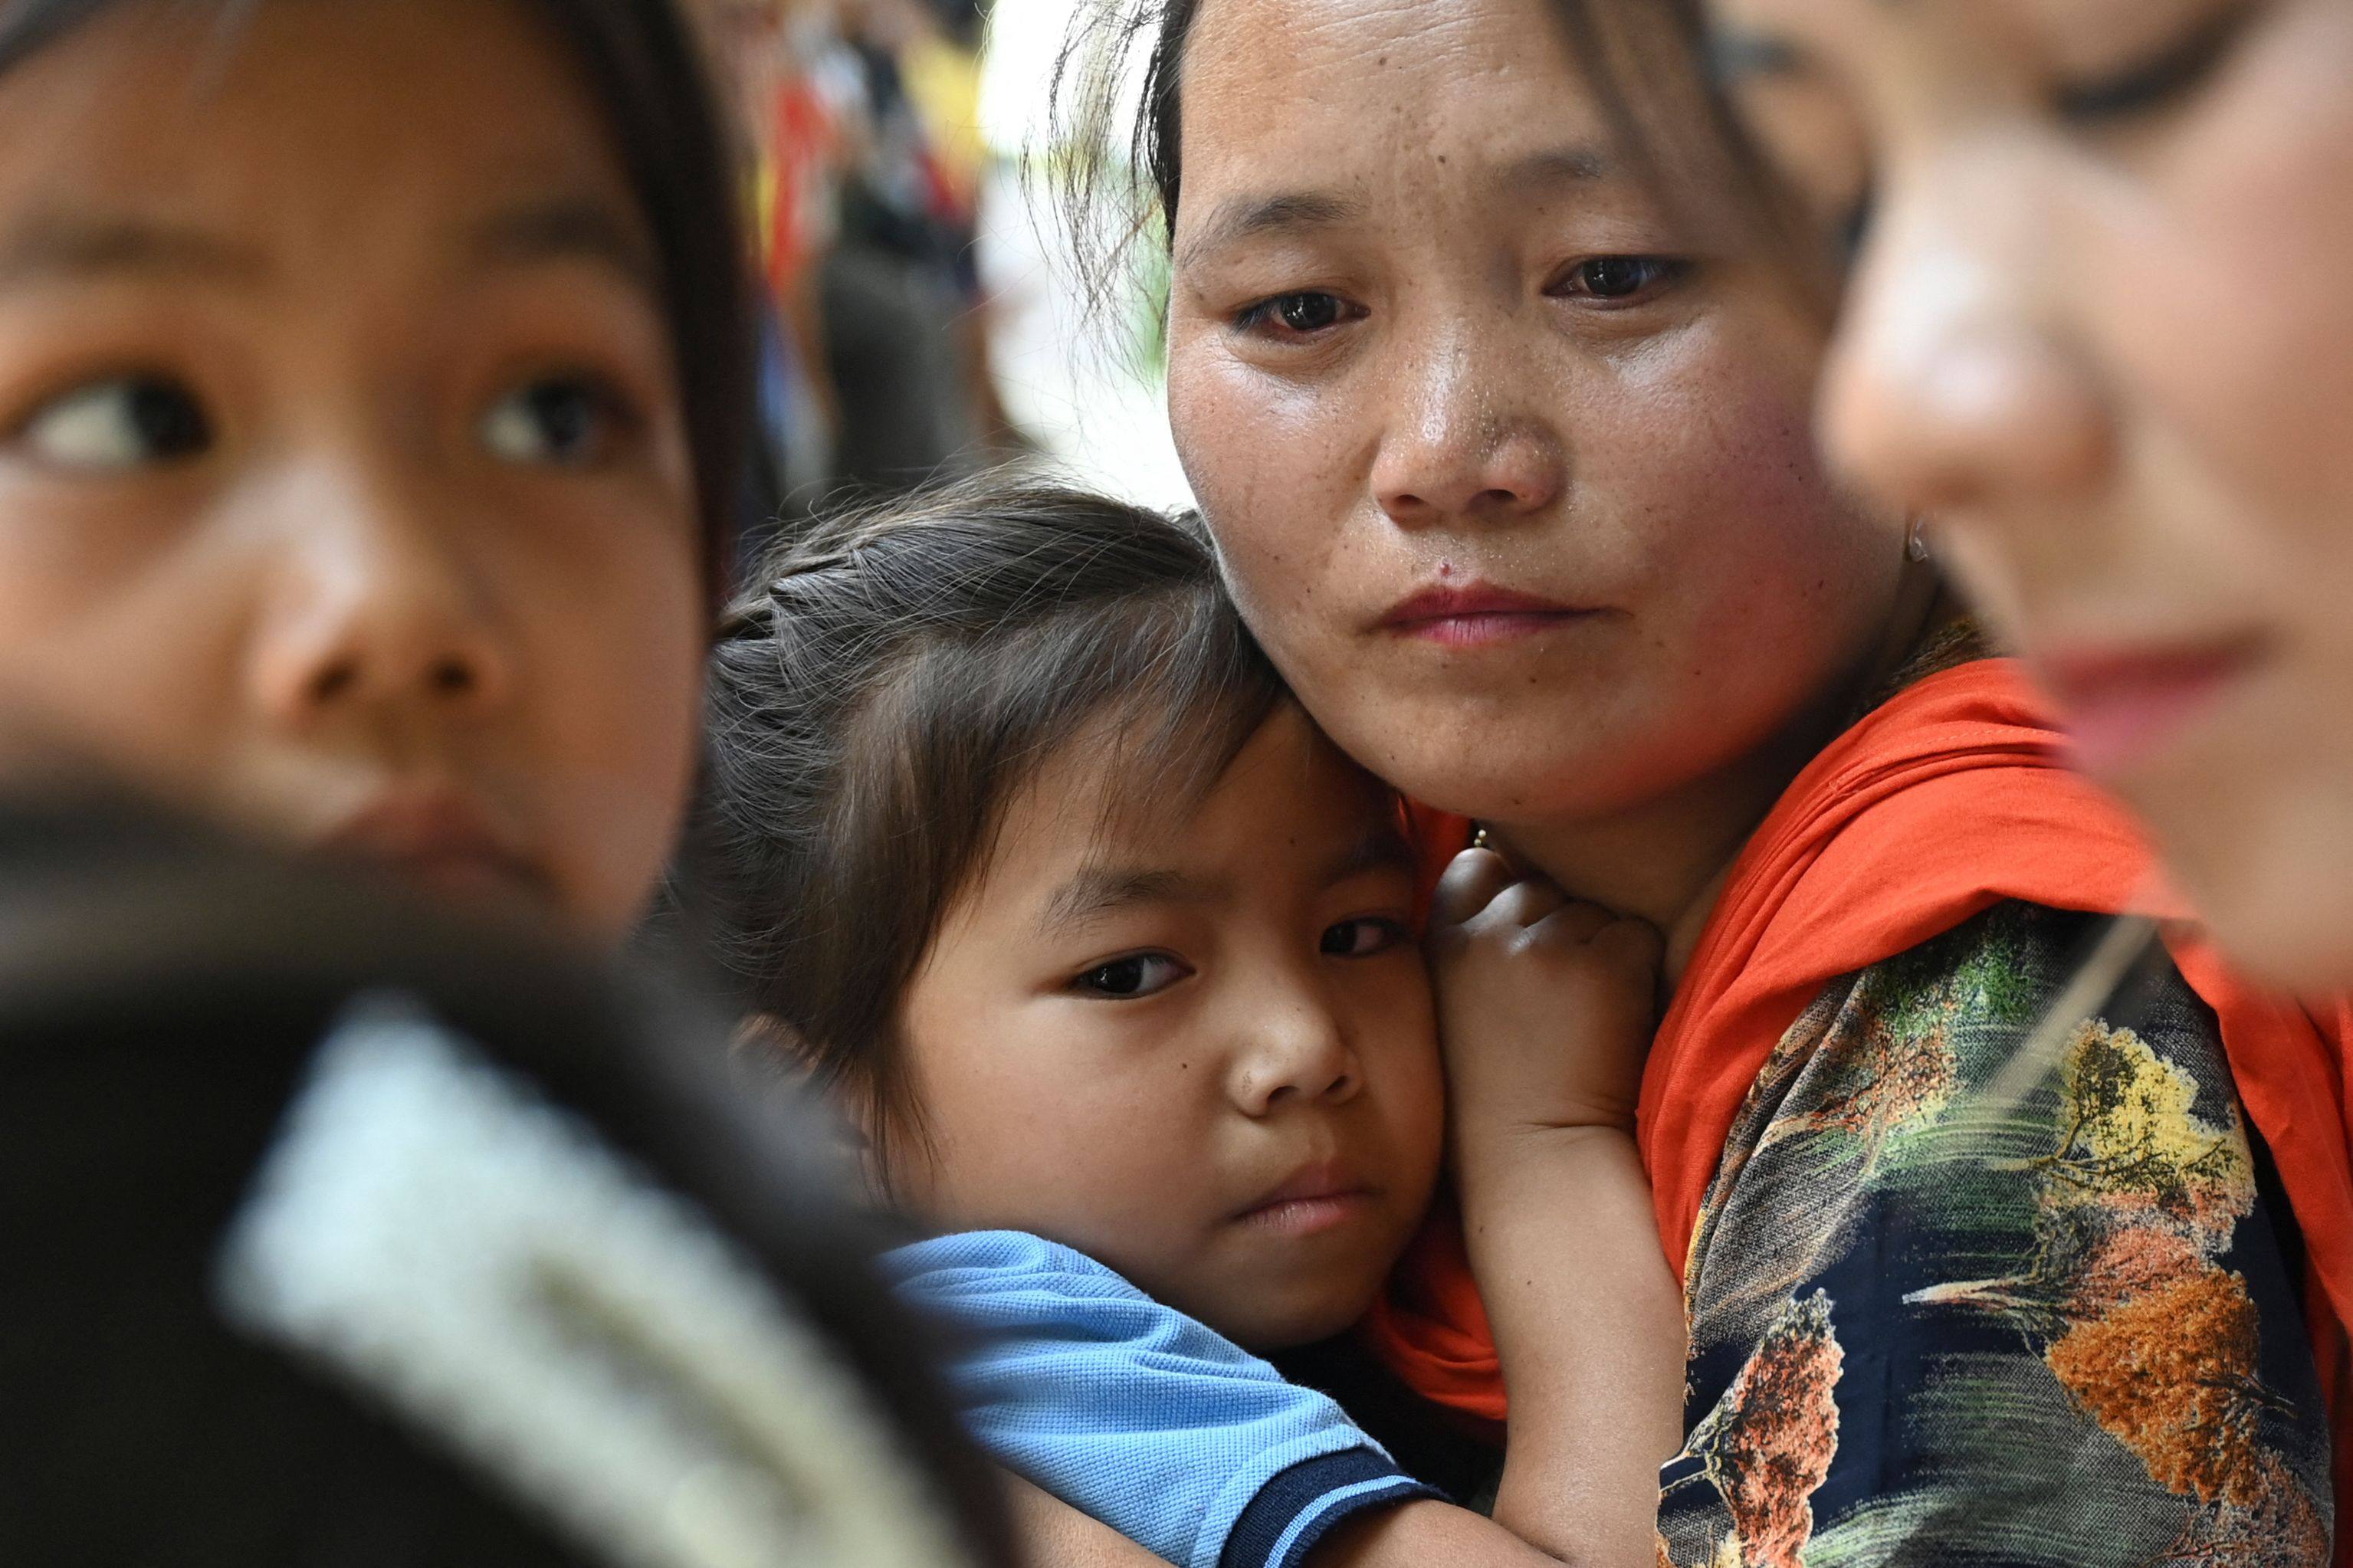 A girl evacuated by the Indian army during ethnic riots in Manipur state embraces her mother after reuniting at a temporary shelter. Photo: AFP